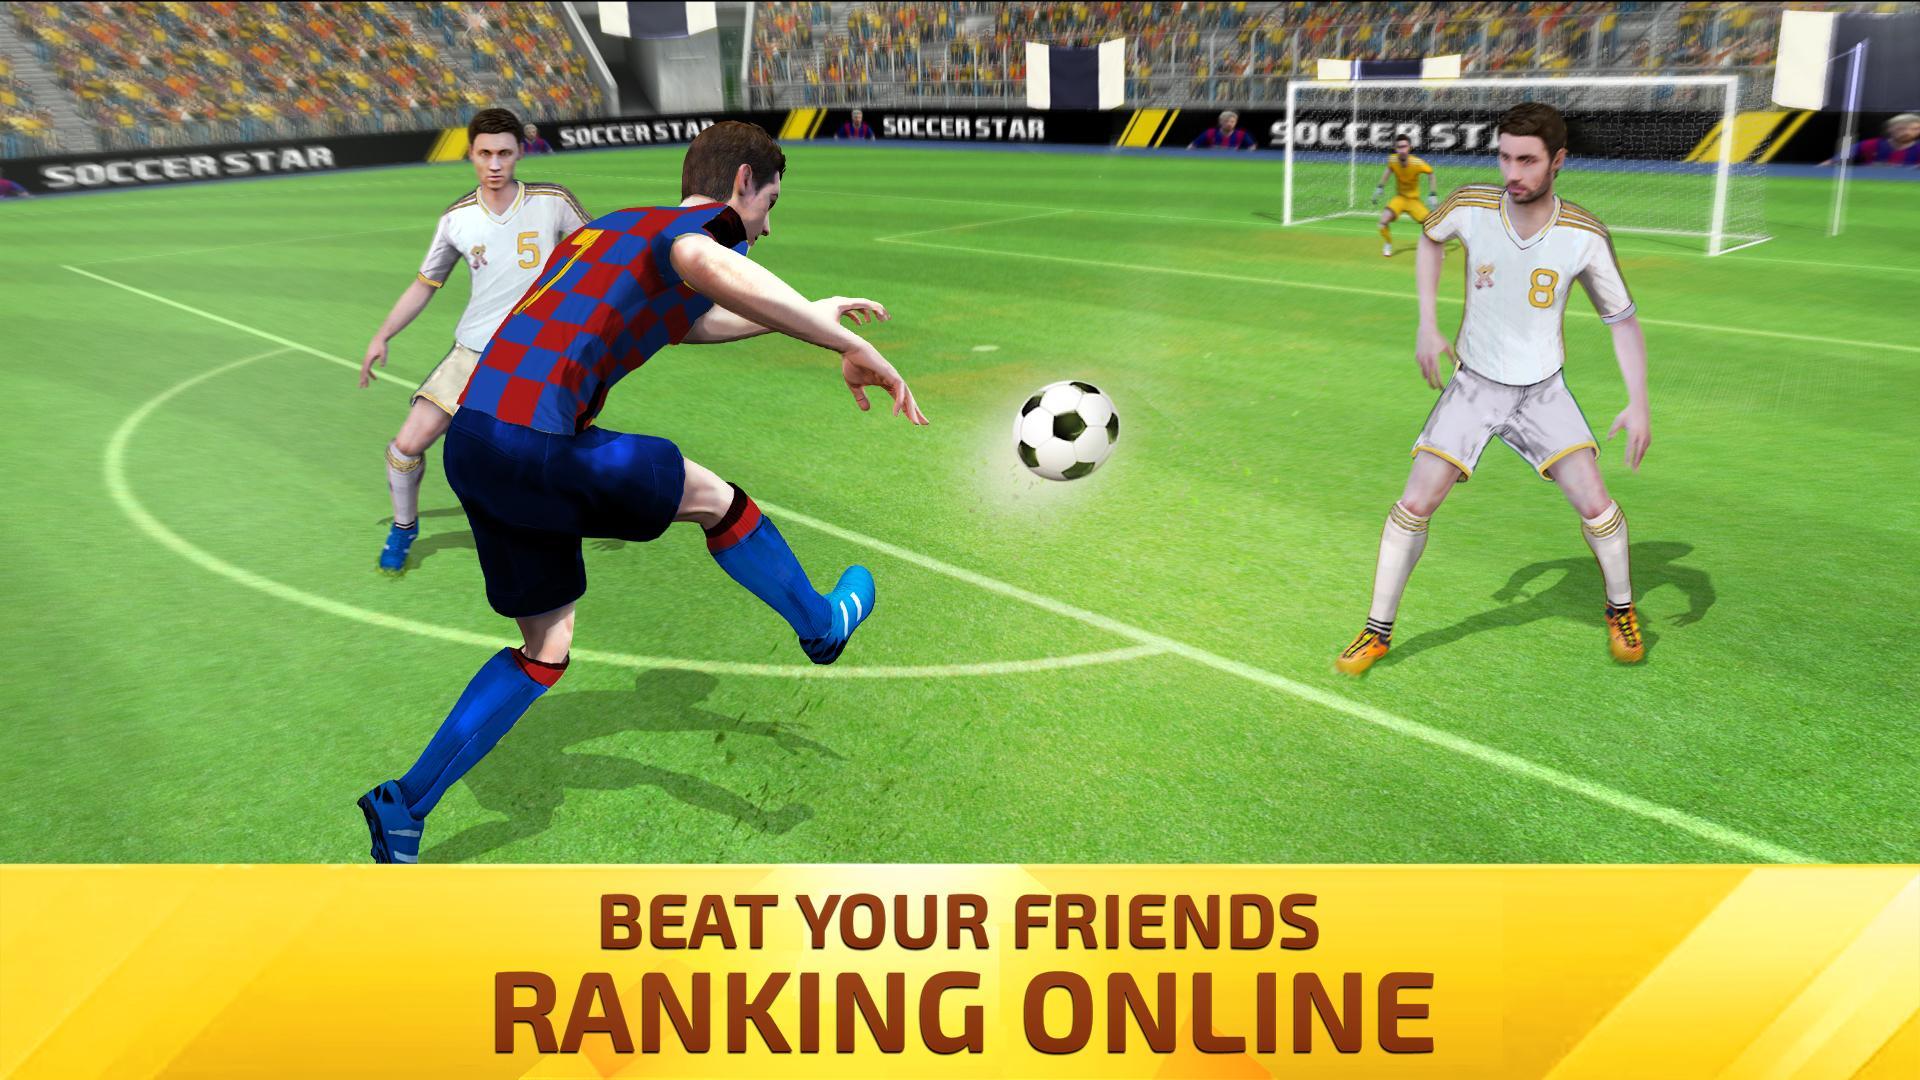 Soccer Star 2020 Top Leagues: Play the SOCCER game 2.4.0 Screenshot 14